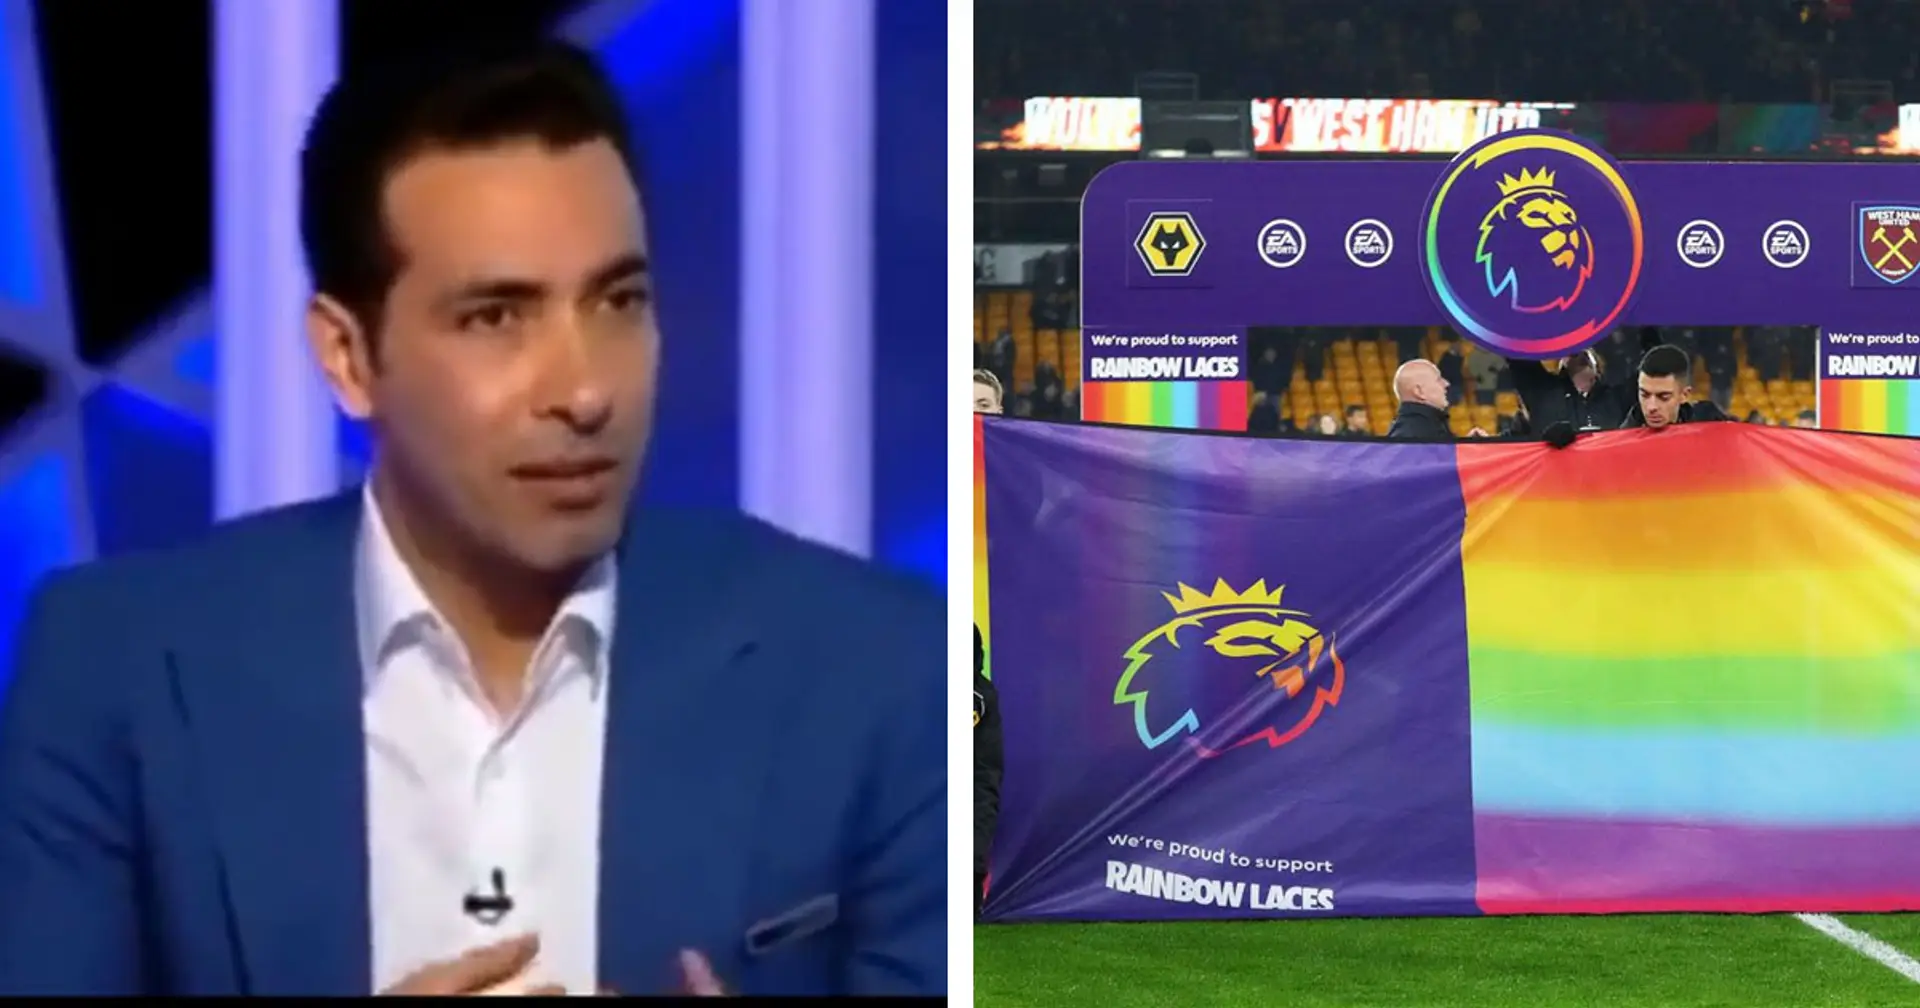 'Homosexuality is against humanity': Ex-Egypt player criticizes Premier League for Rainbow Laces campaign